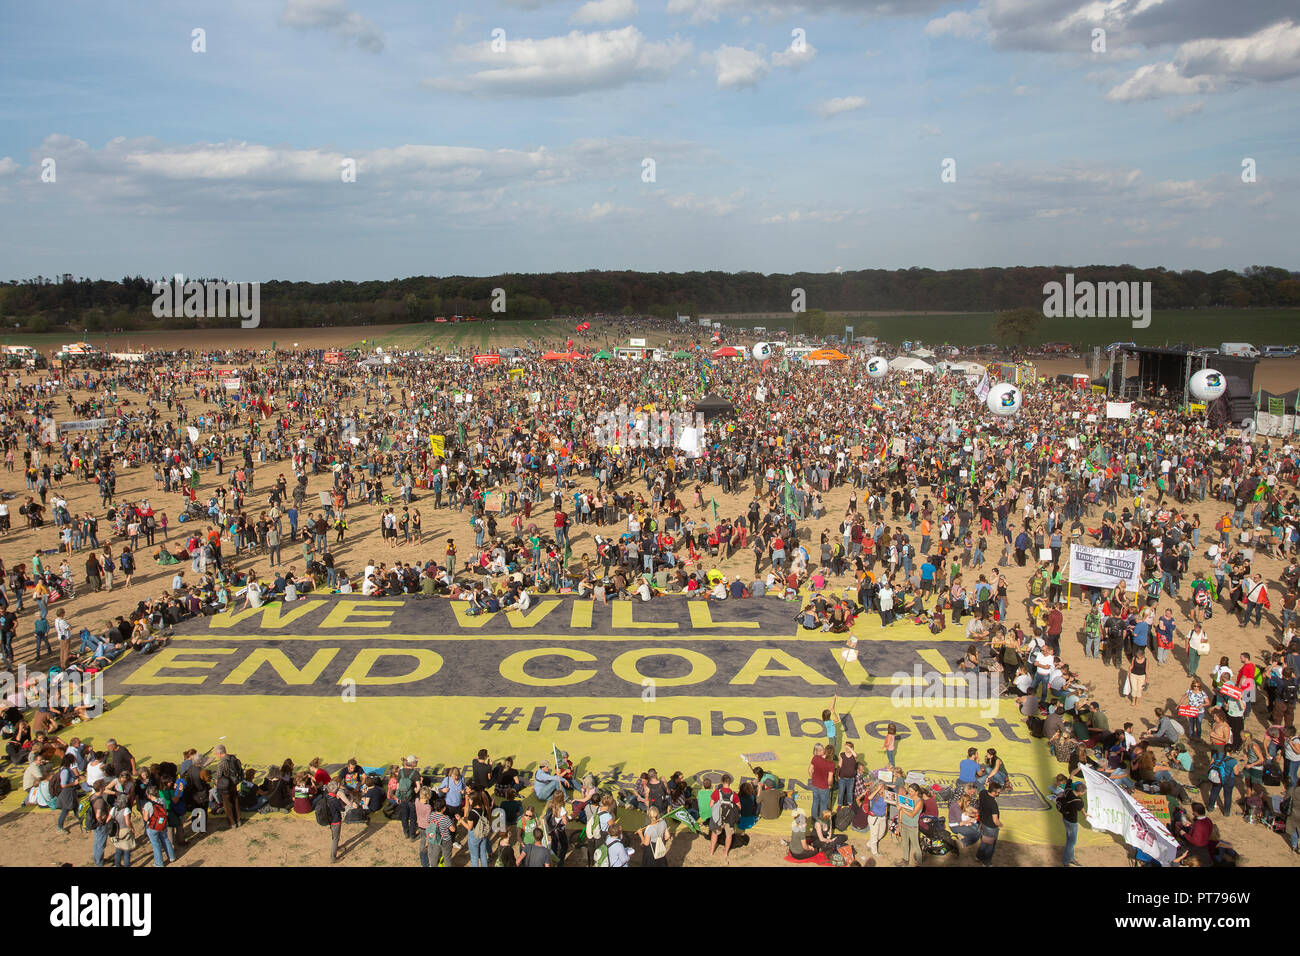 Hamacher Forst, Germany. 6th October 2018. On Saturday (06.10.18) 50,000 people protested with banners, posters and balloons at the Hambacher Forst near Cologne for more climate protection and against lignite mining. Credit: Guido Schiefer/Alamy Live News Stock Photo